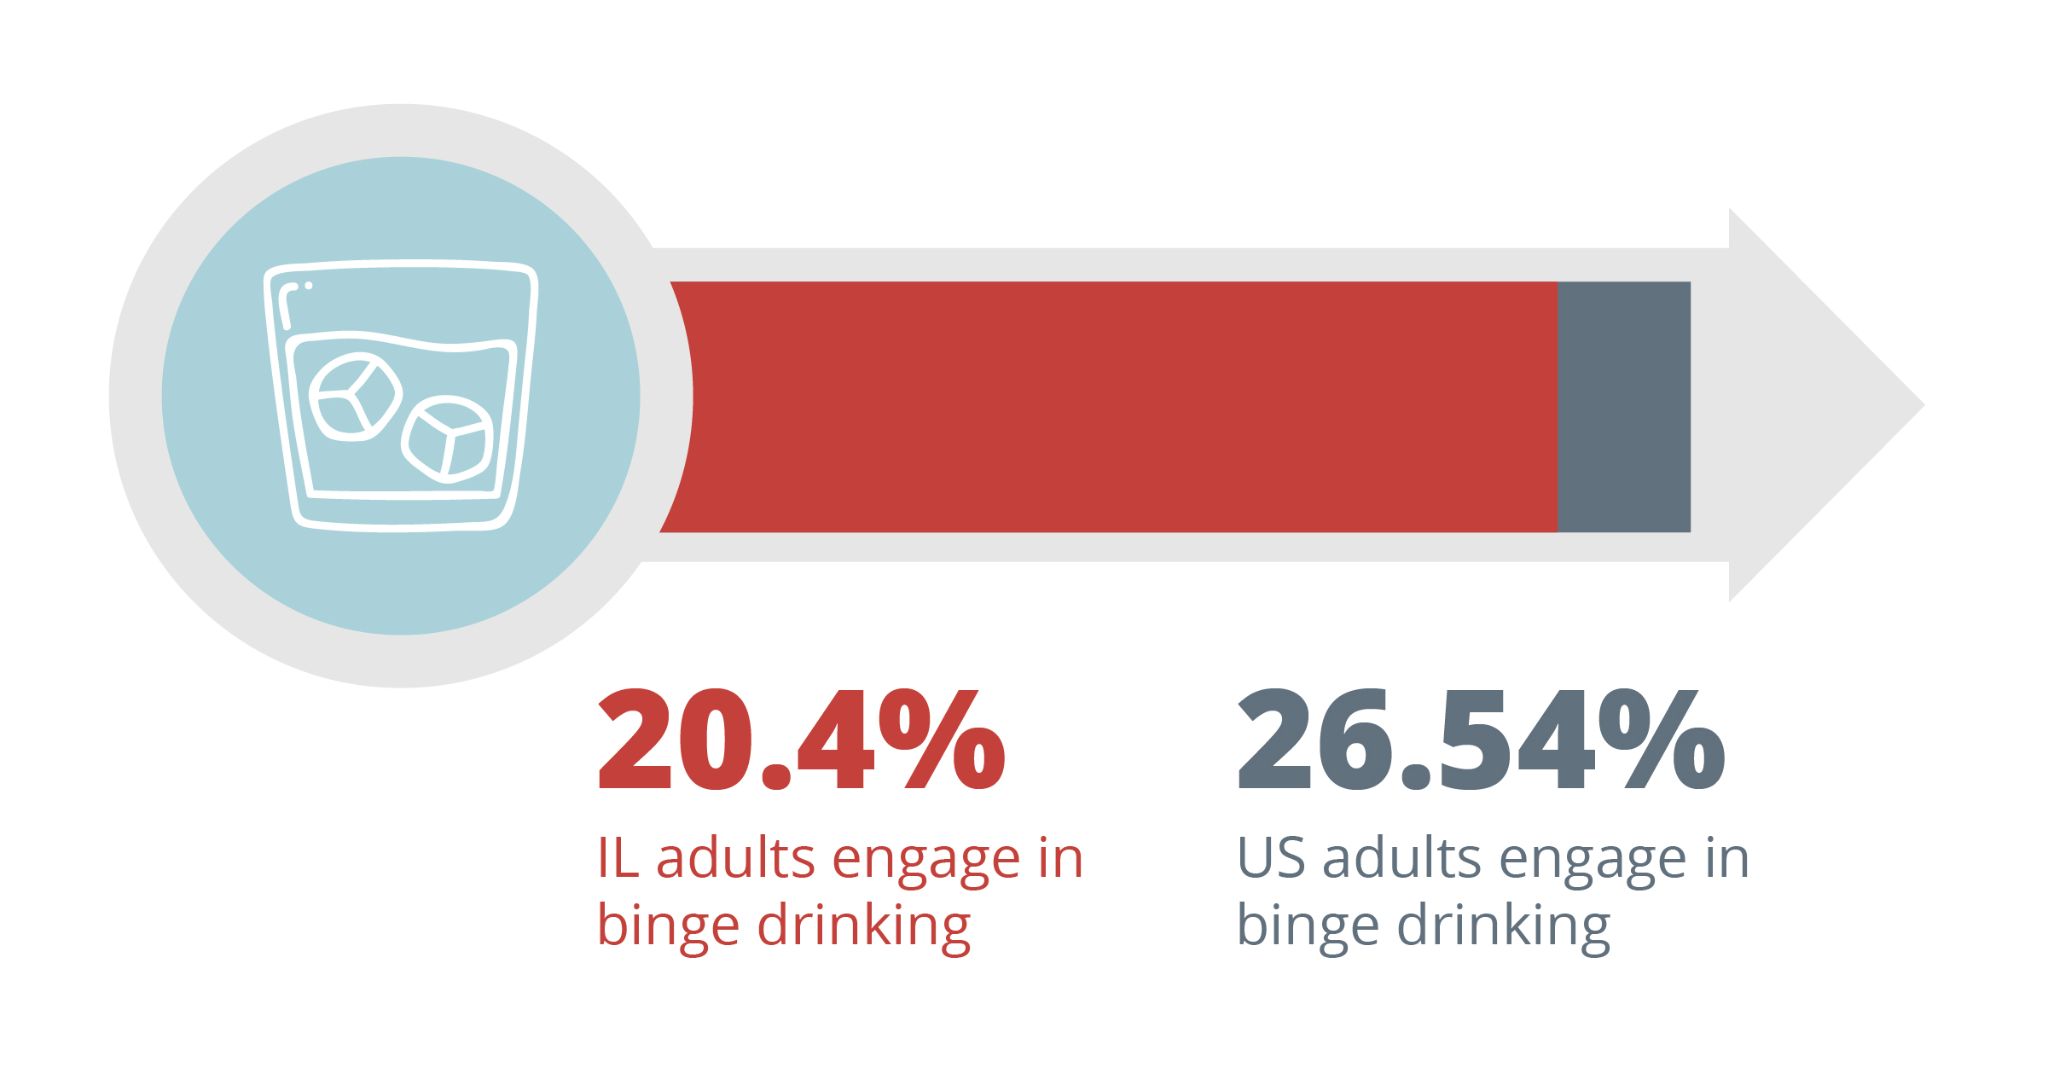 20.4% of illinois adults engage in binge drinking. 26.54% of American adults engage in binge drinking. Drug And Alcohol Detox & Rehab, Addiction Treatment Resources in Carbondale Illinois